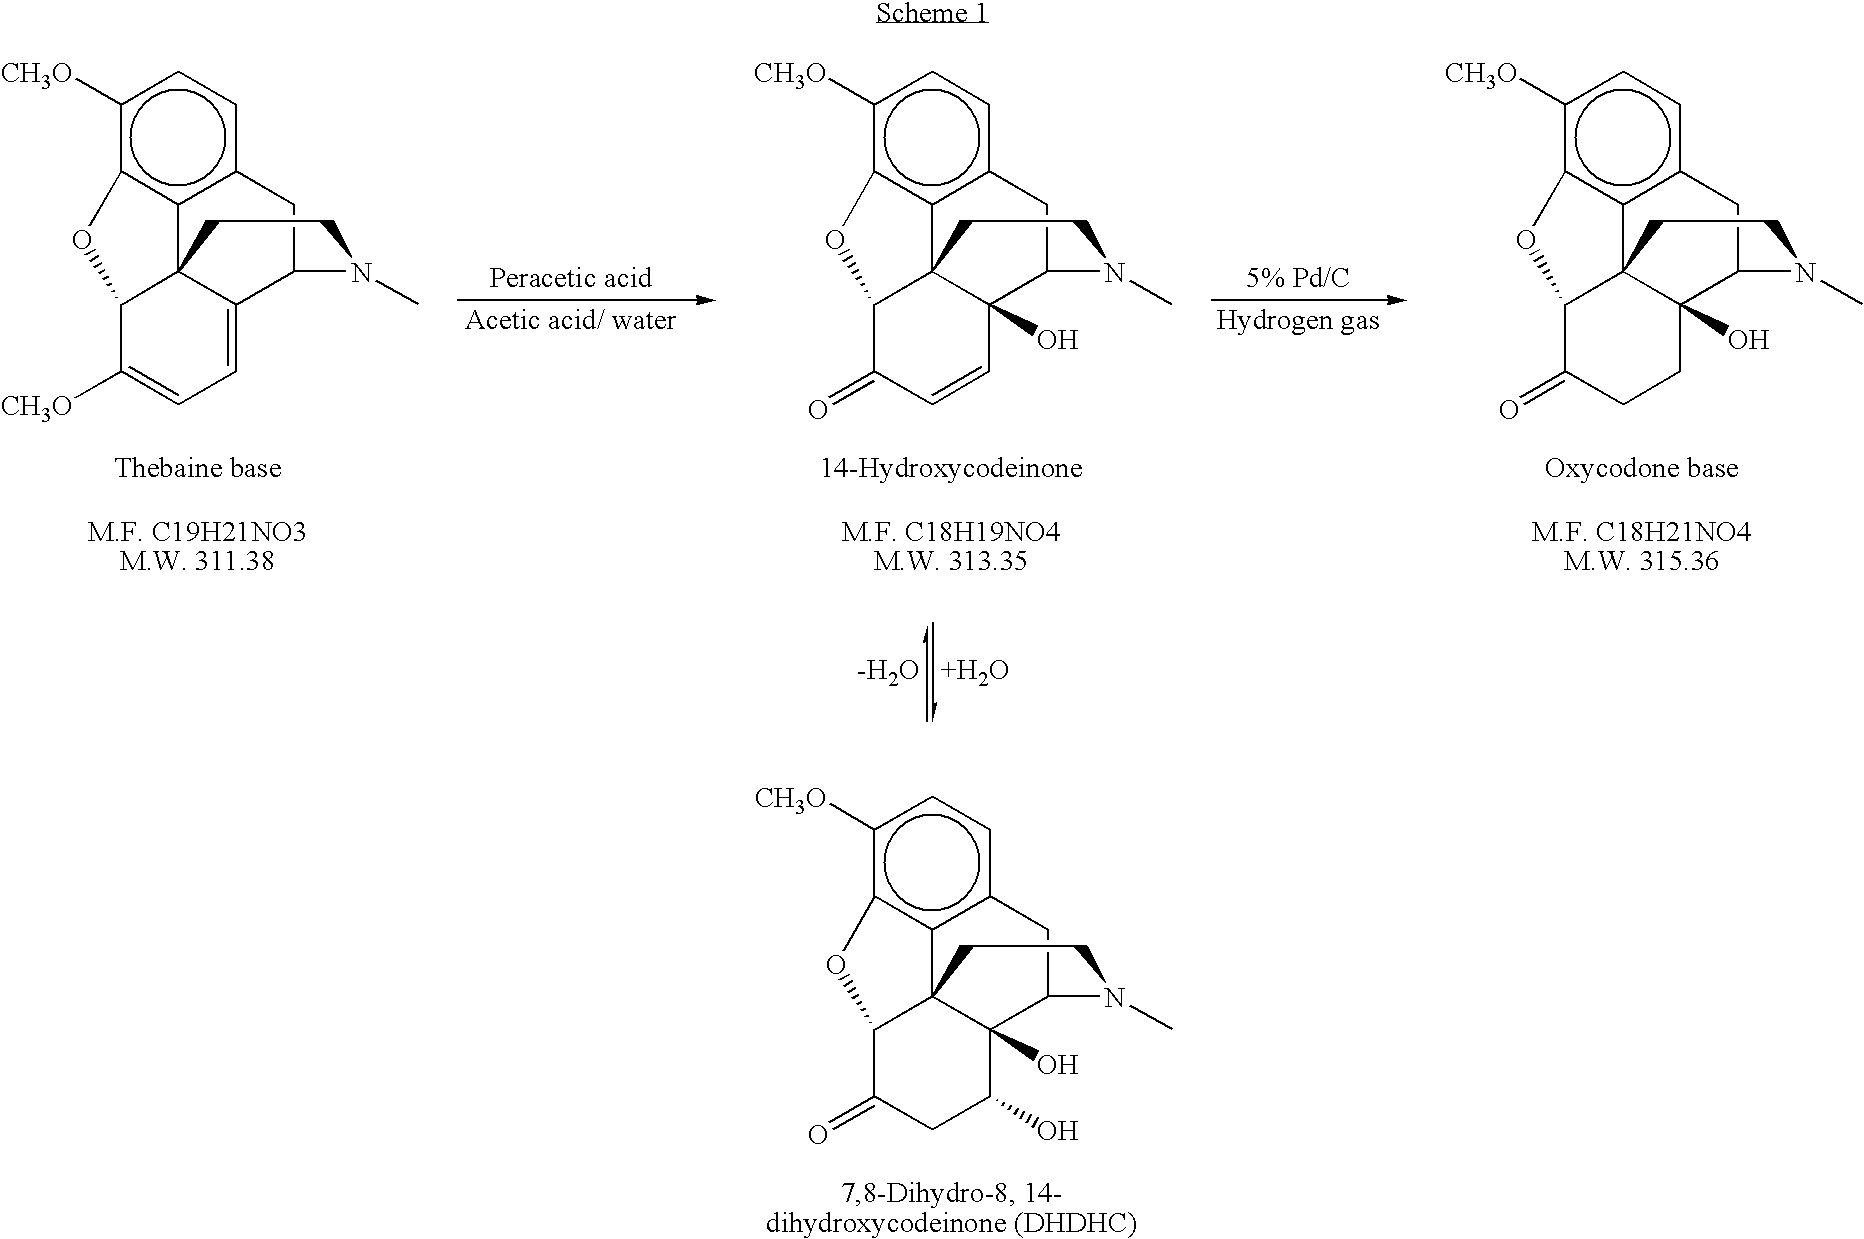 Process for Reducing Impurities in Oxycodone Base